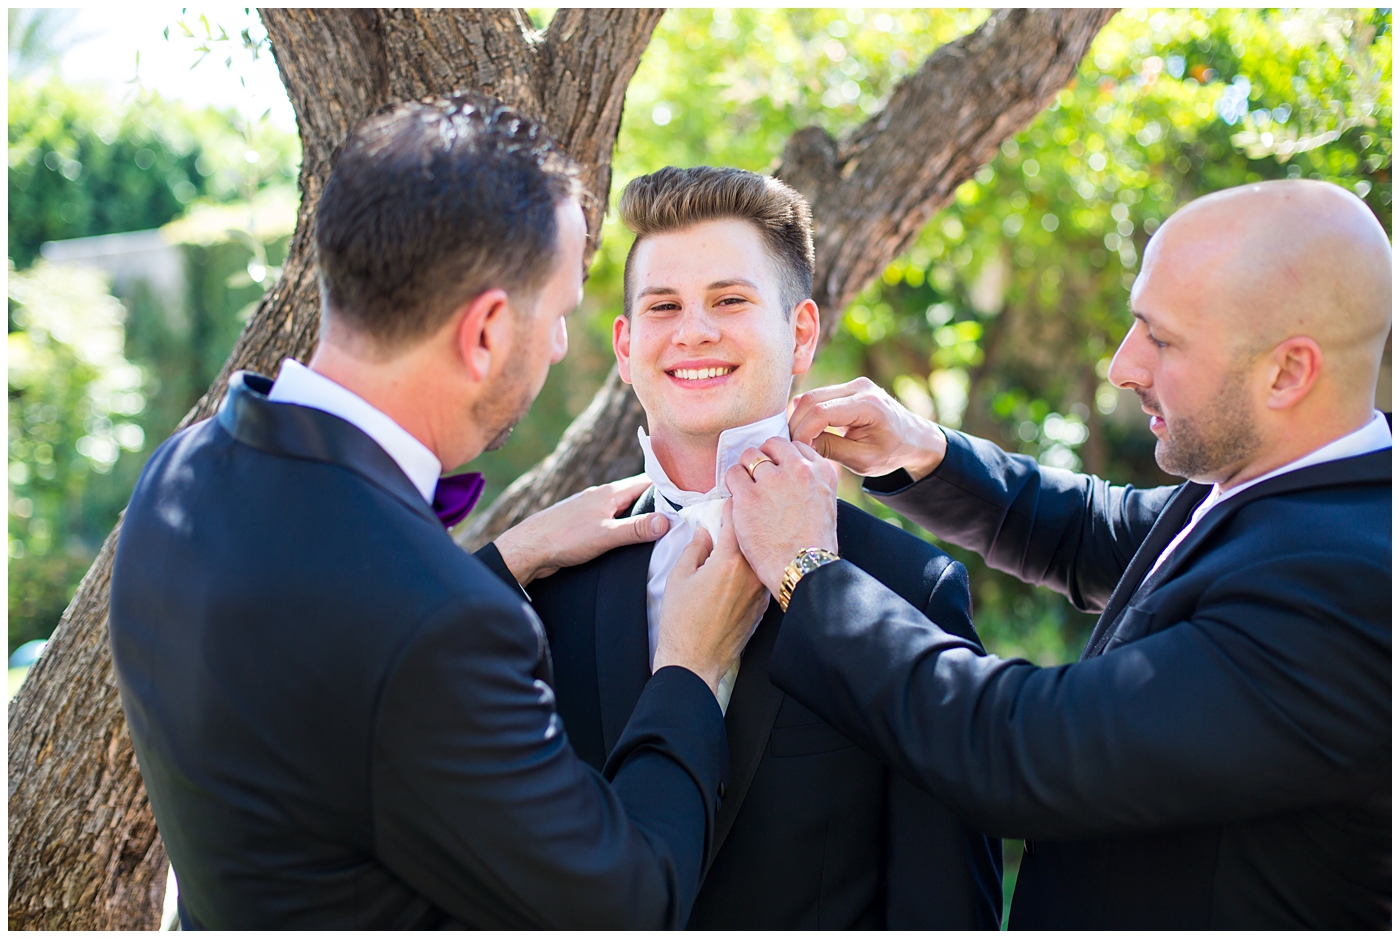 groom in black suit with purple bowtie with black and white feather getting ready with groomsmen on wedding day